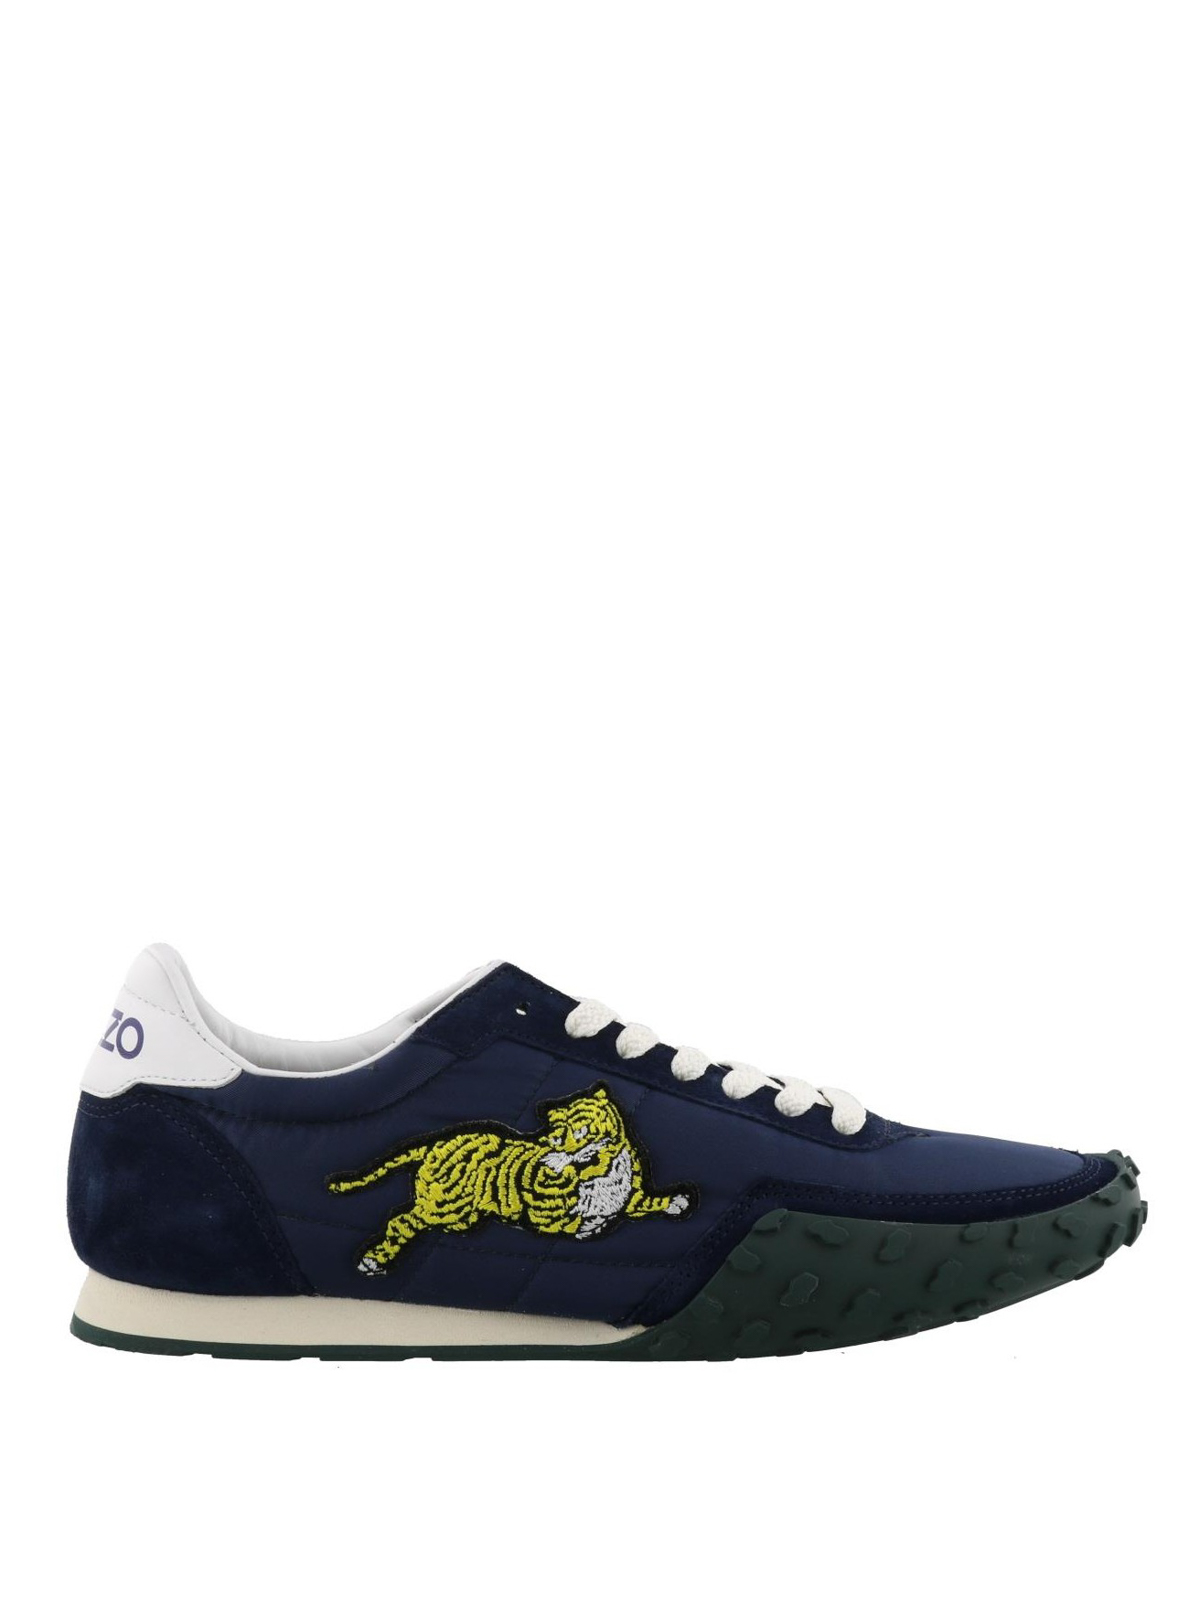 KENZO Move blue sneakers - trainers 